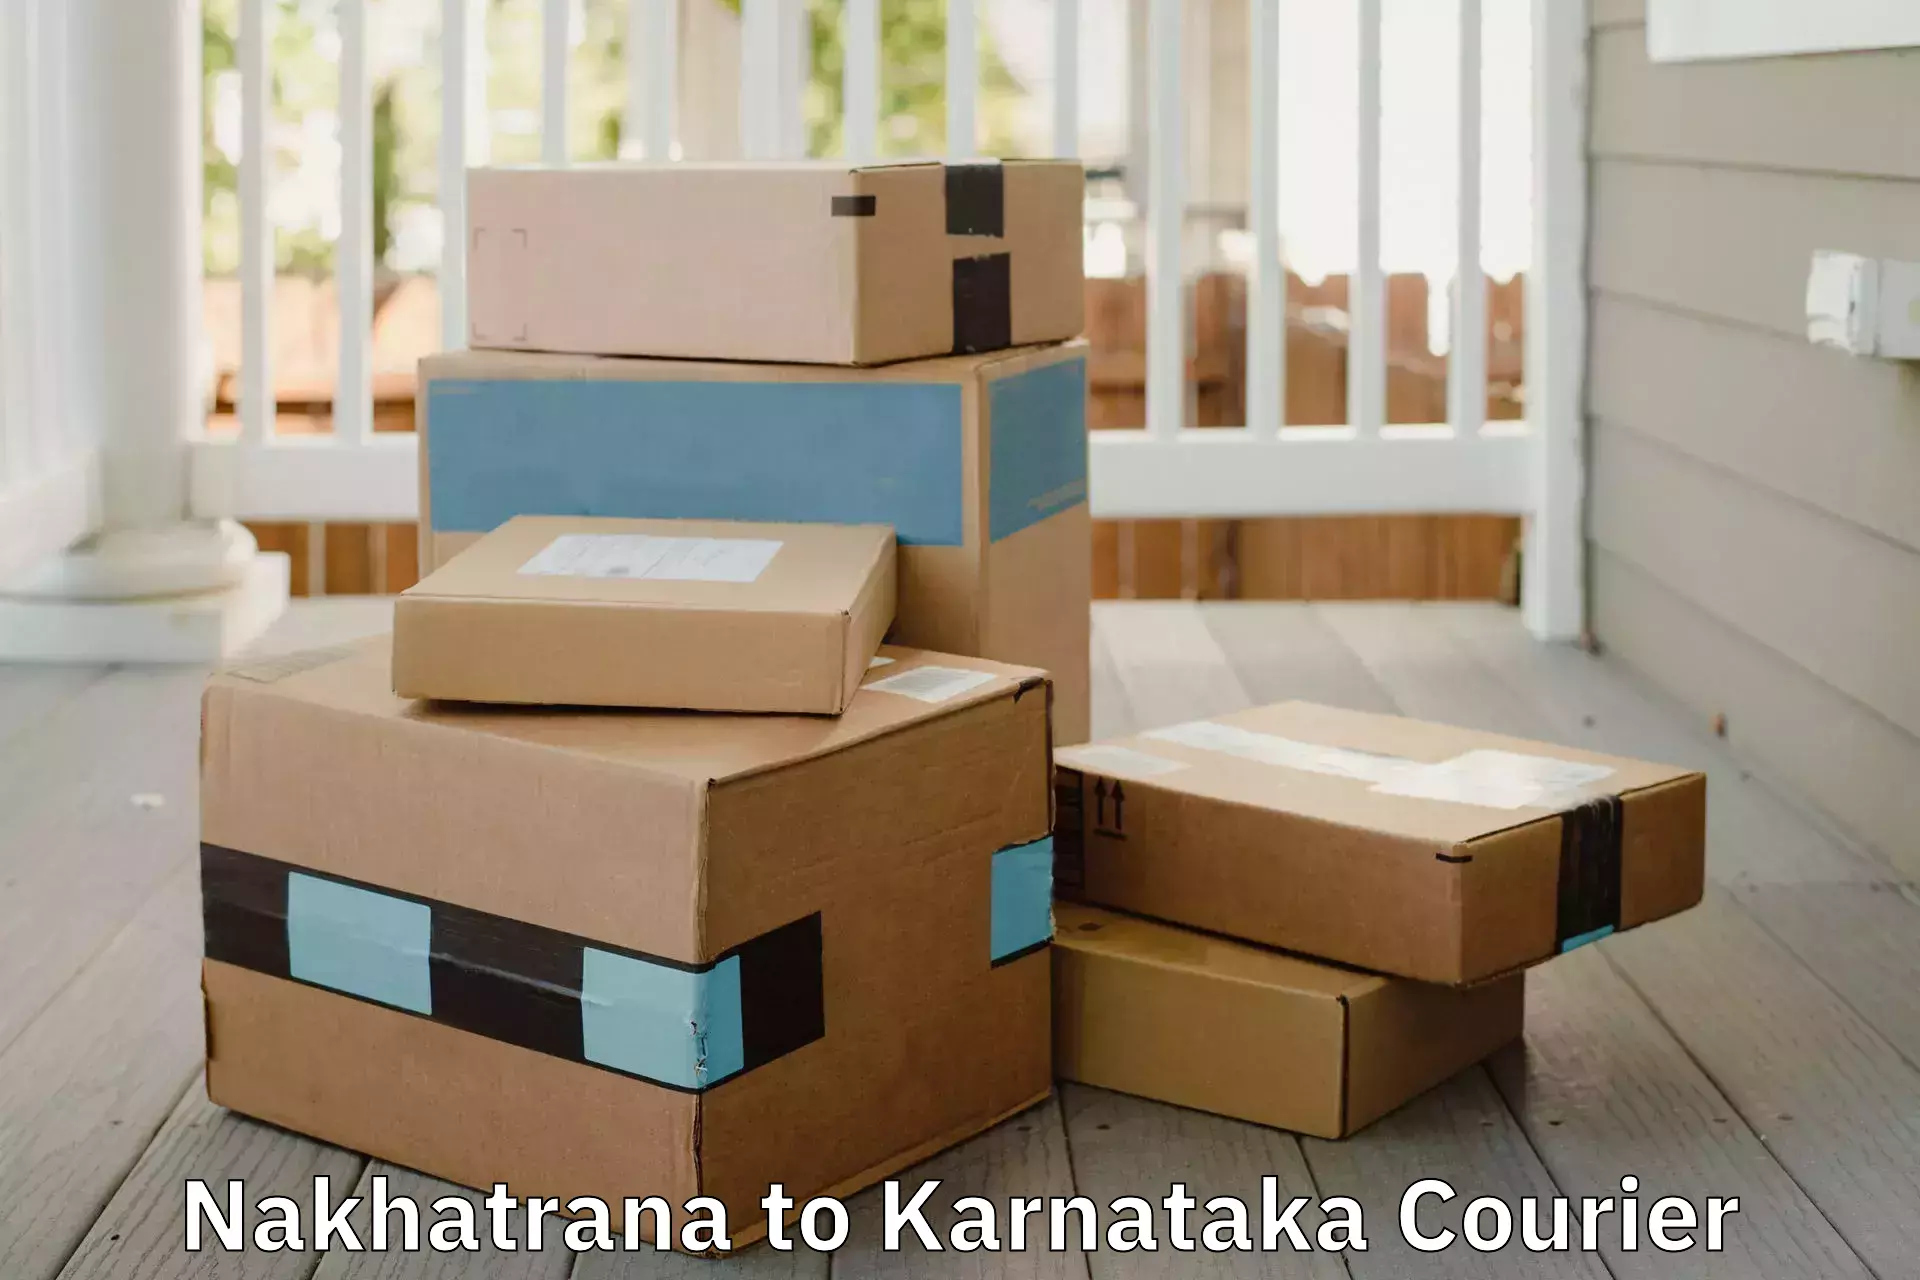 Trusted furniture transport in Nakhatrana to Manipal Academy of Higher Education